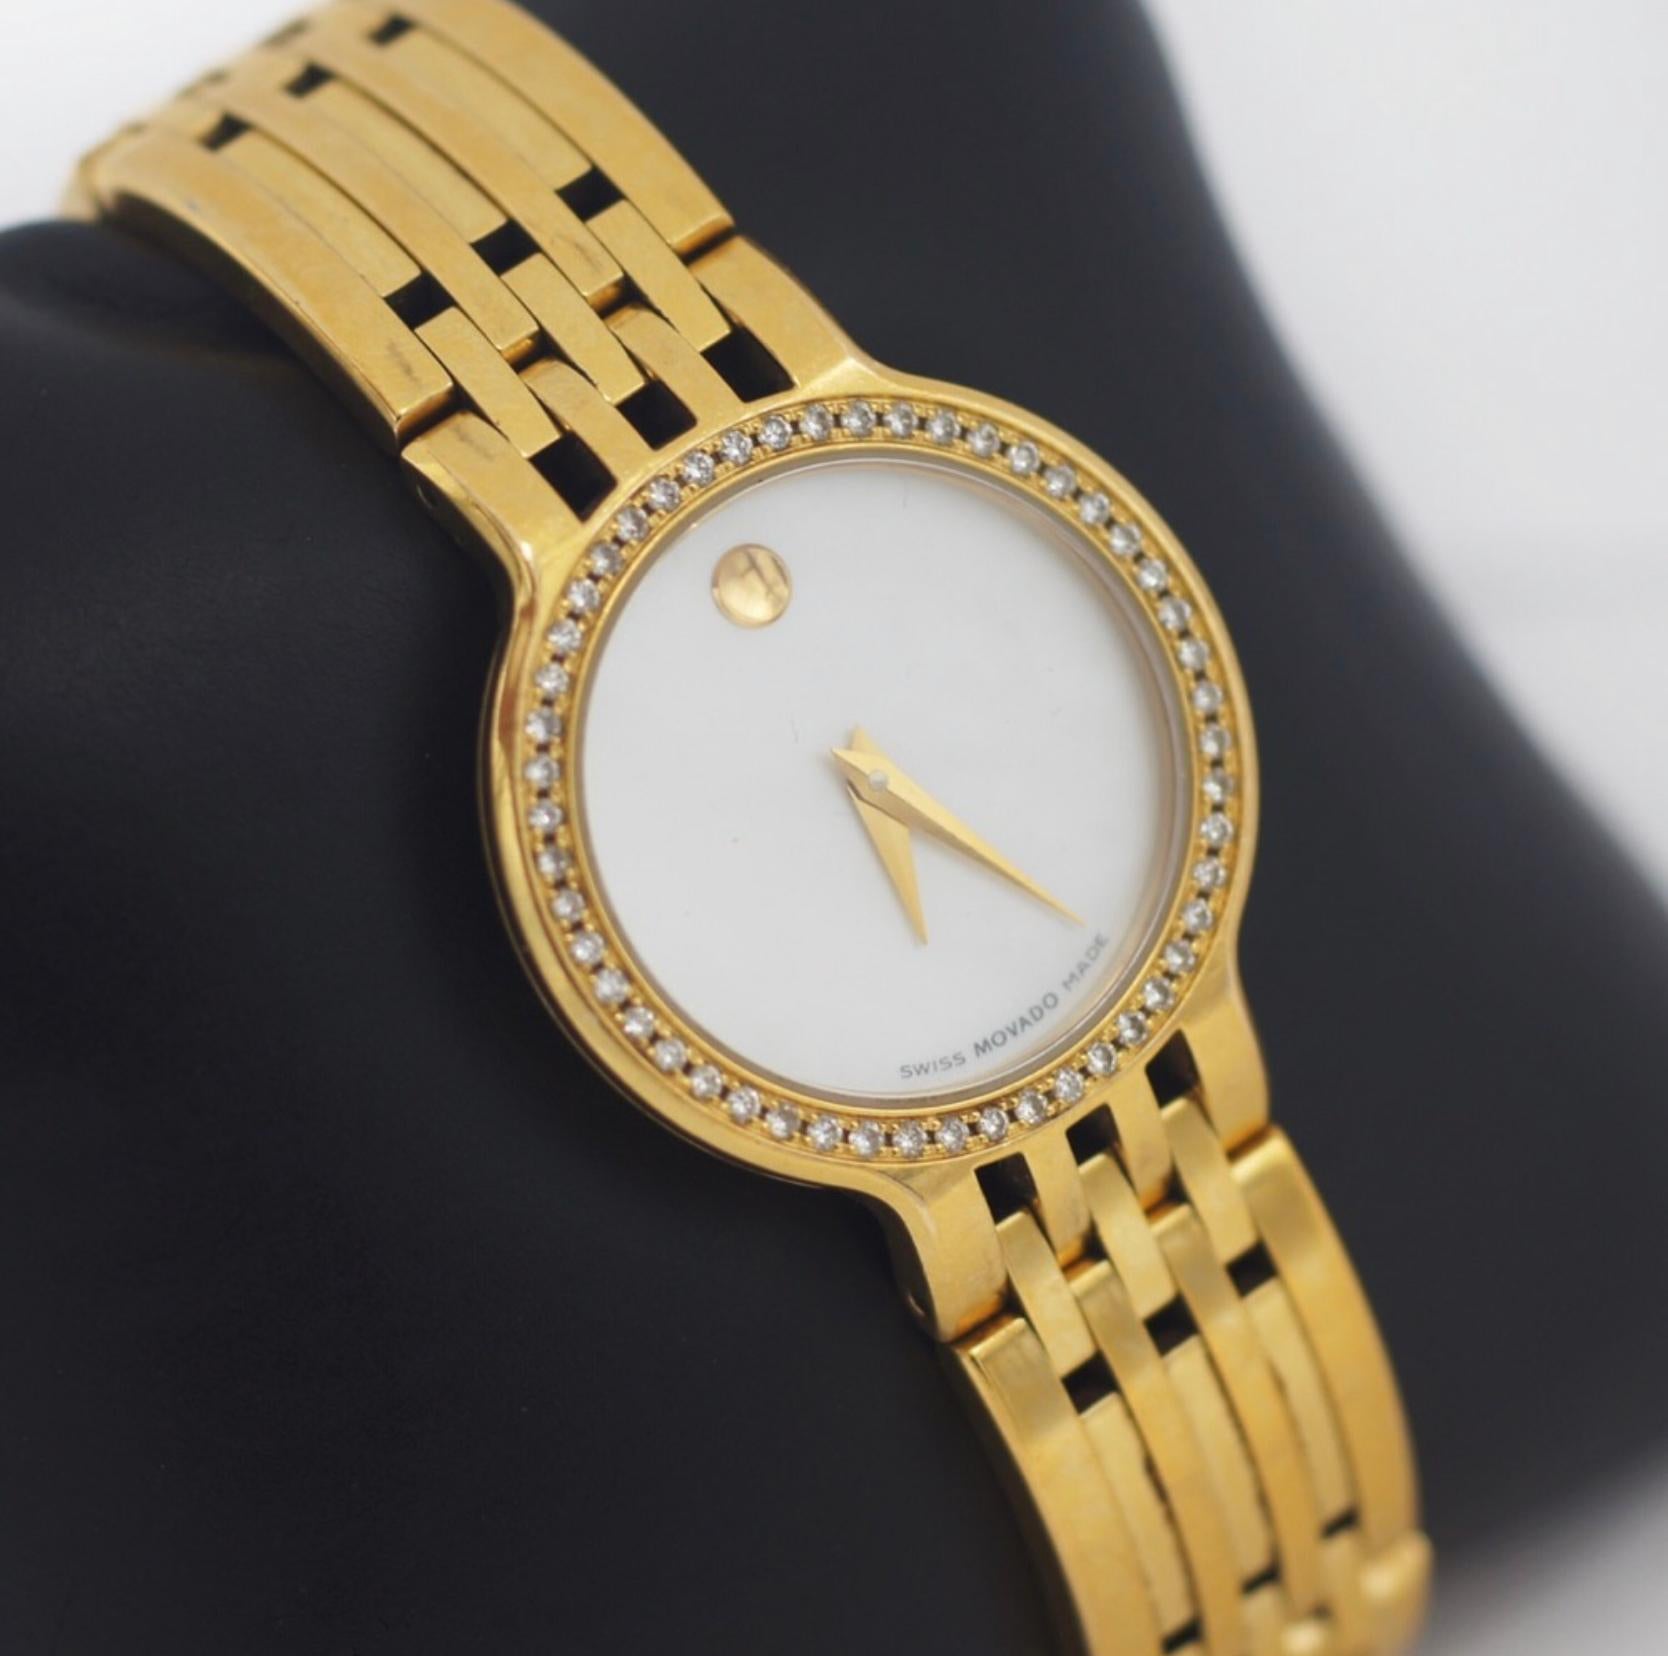 This beautiful Movado wristwatch from the Esperanza collection is beautifully constructed of gold tone stailess steel and has a diamond-set bezel that bringings out the Mother of pearl dial and features Movado's signature dot at 12